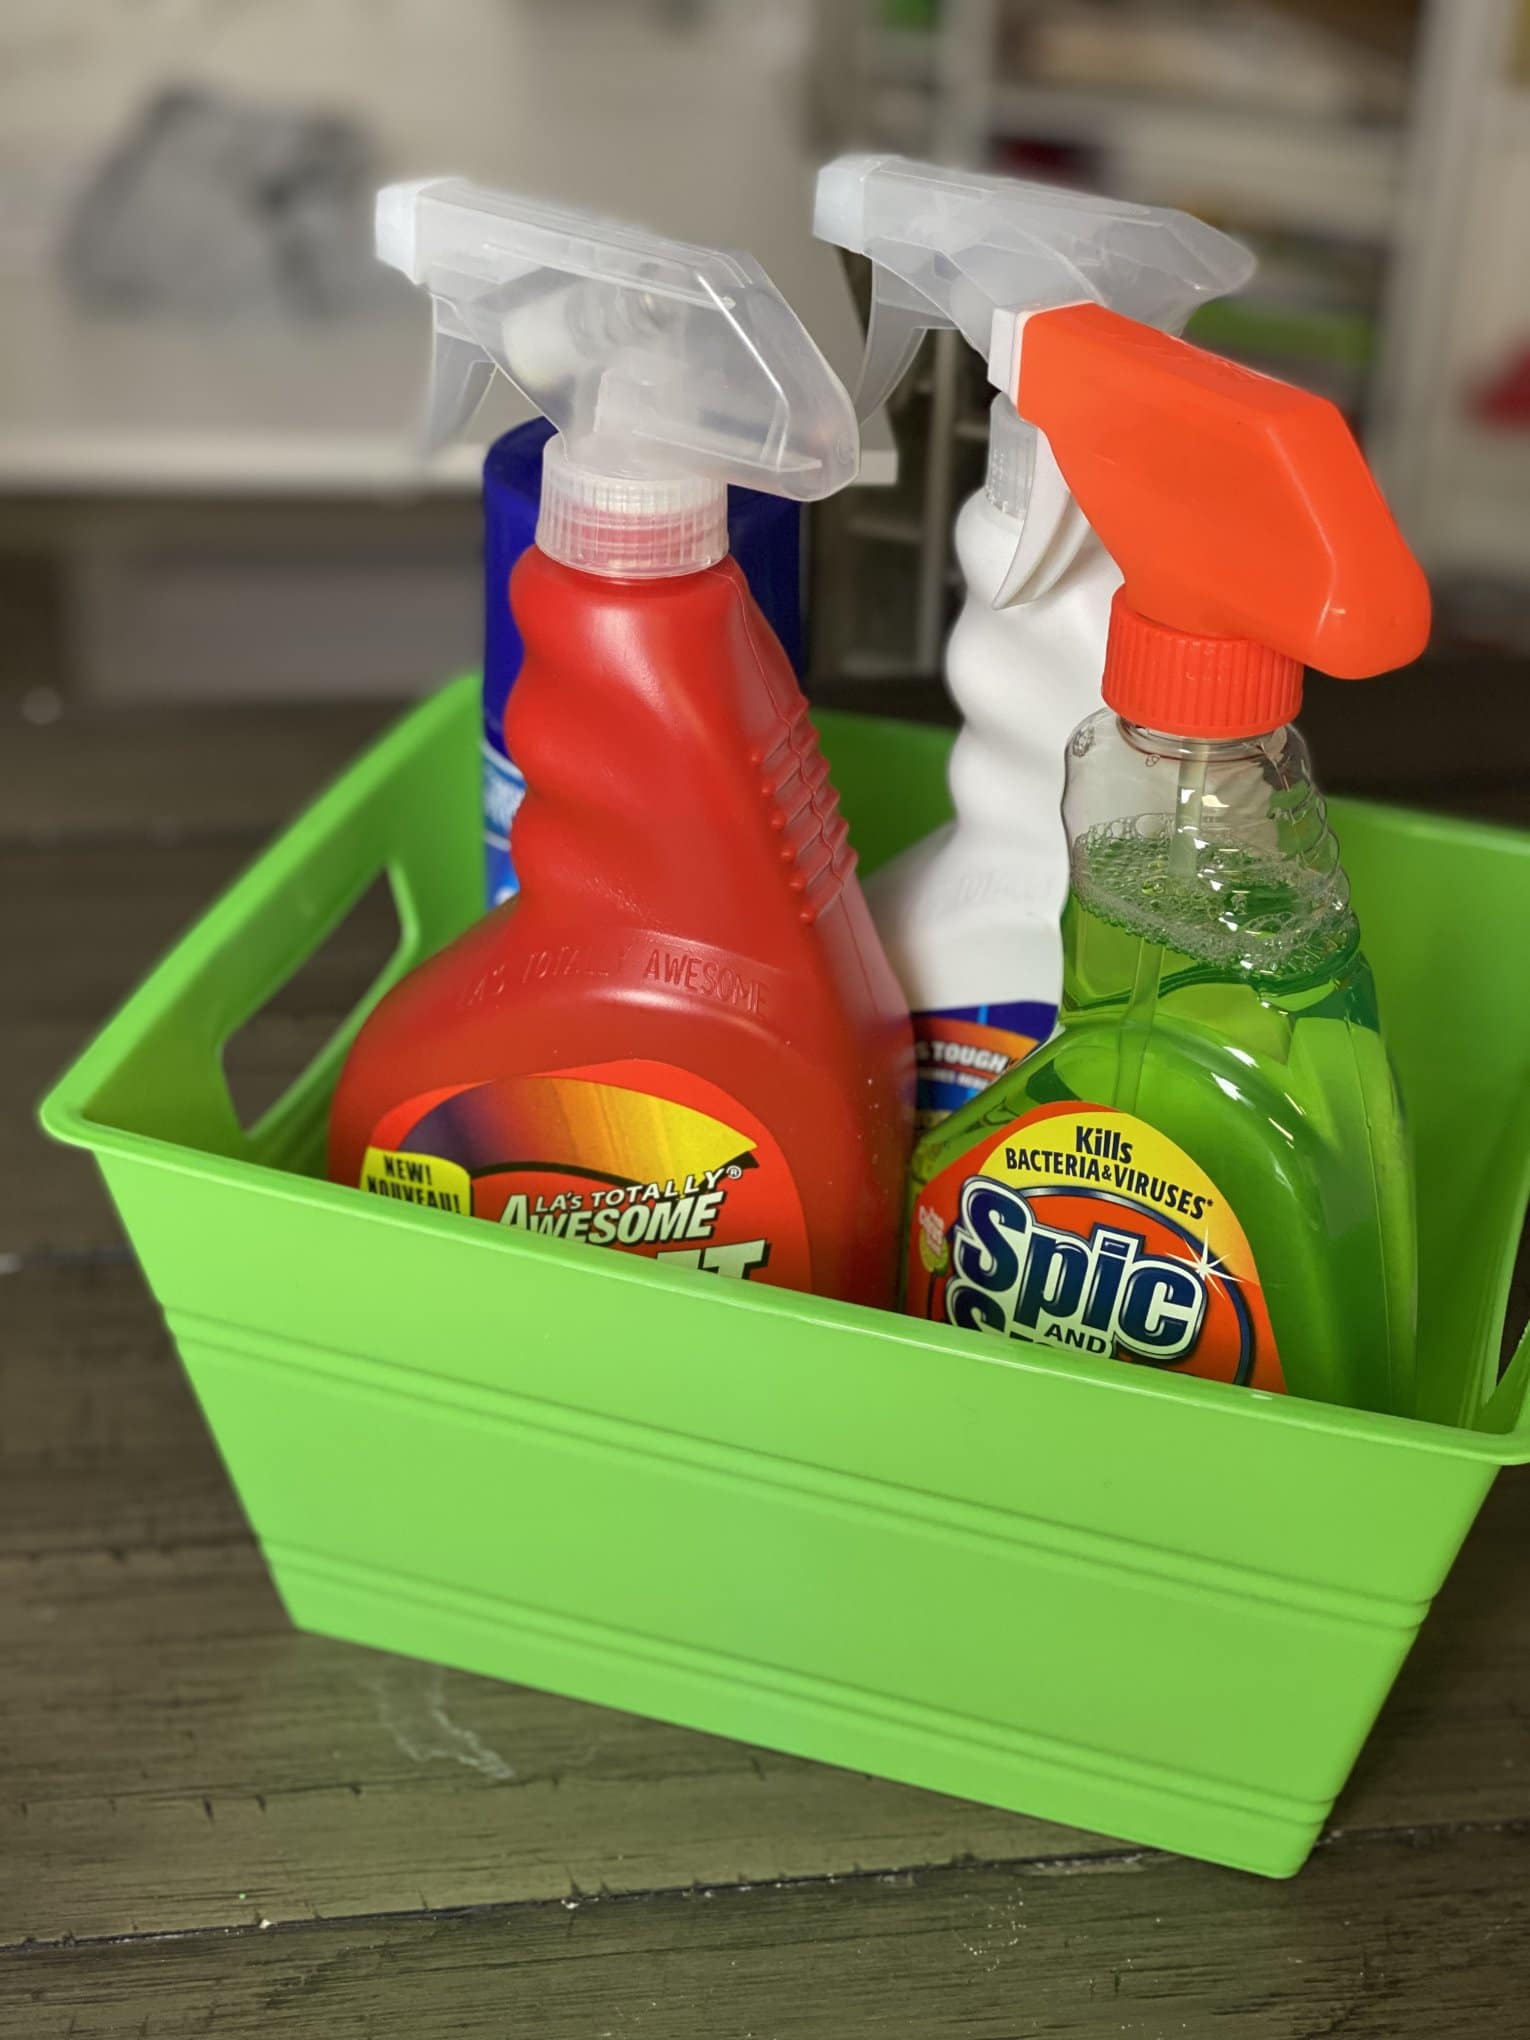 BATHROOM CLEANING, DOLLAR TREE PRODUCTS